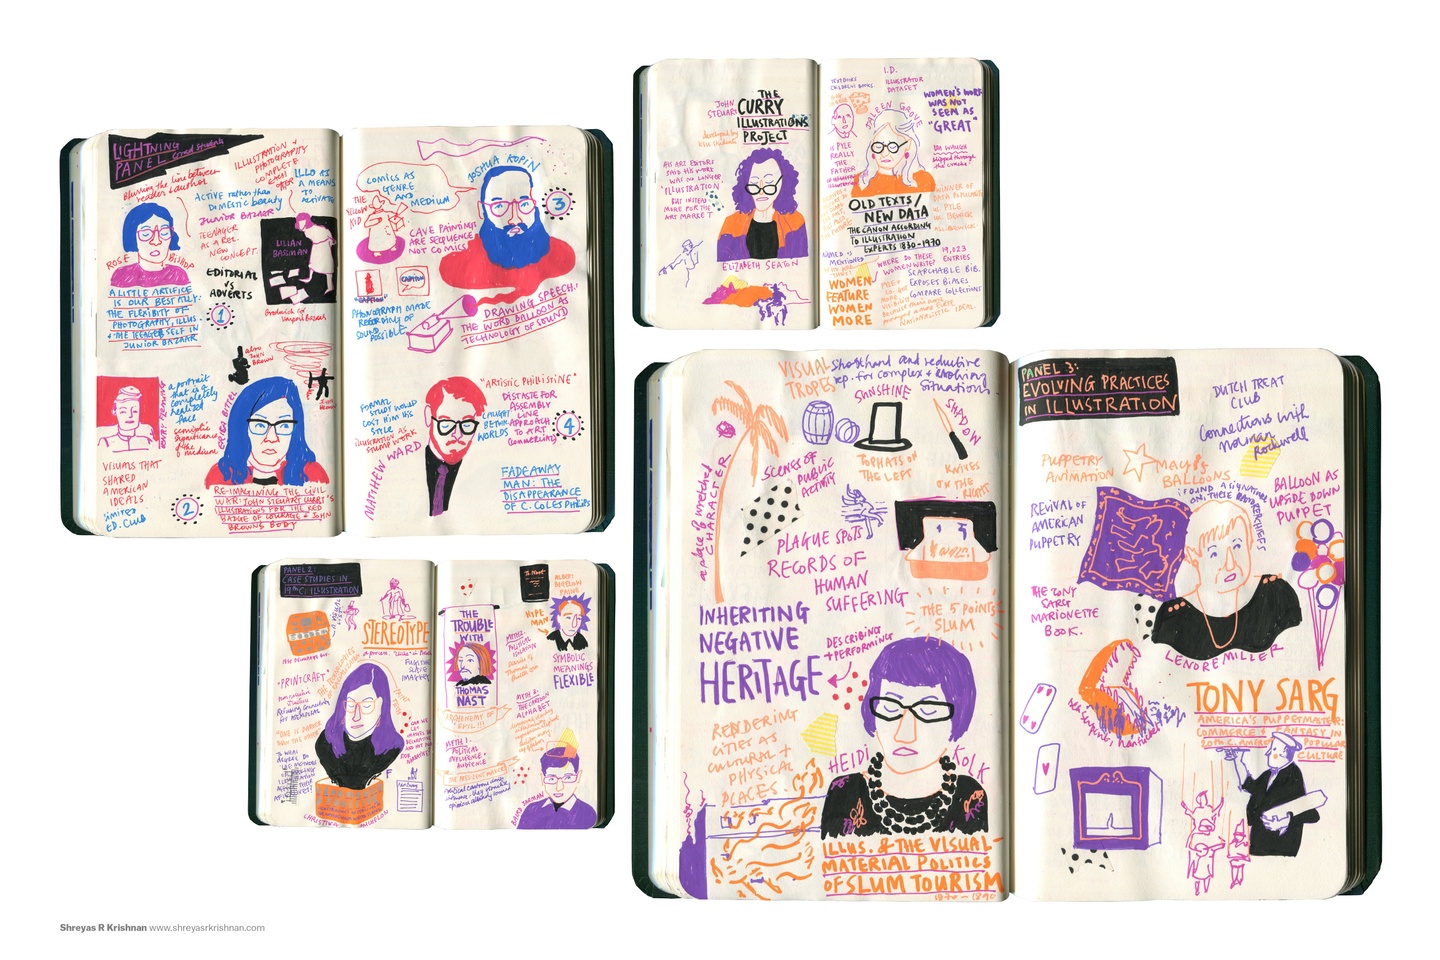 Spreads from a sketchbook: clippings from talks frame portraits of speakers. The drawings and notes are in various vibrant colors.